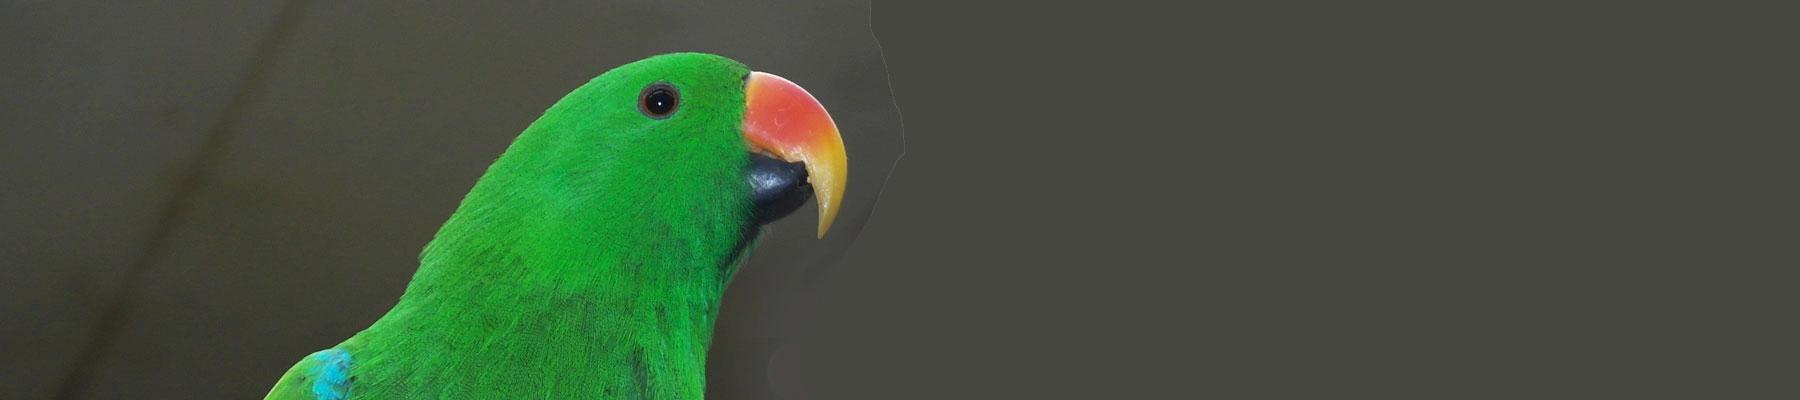 Male Eclectus Parrot. Image by RitaE from Pixabay